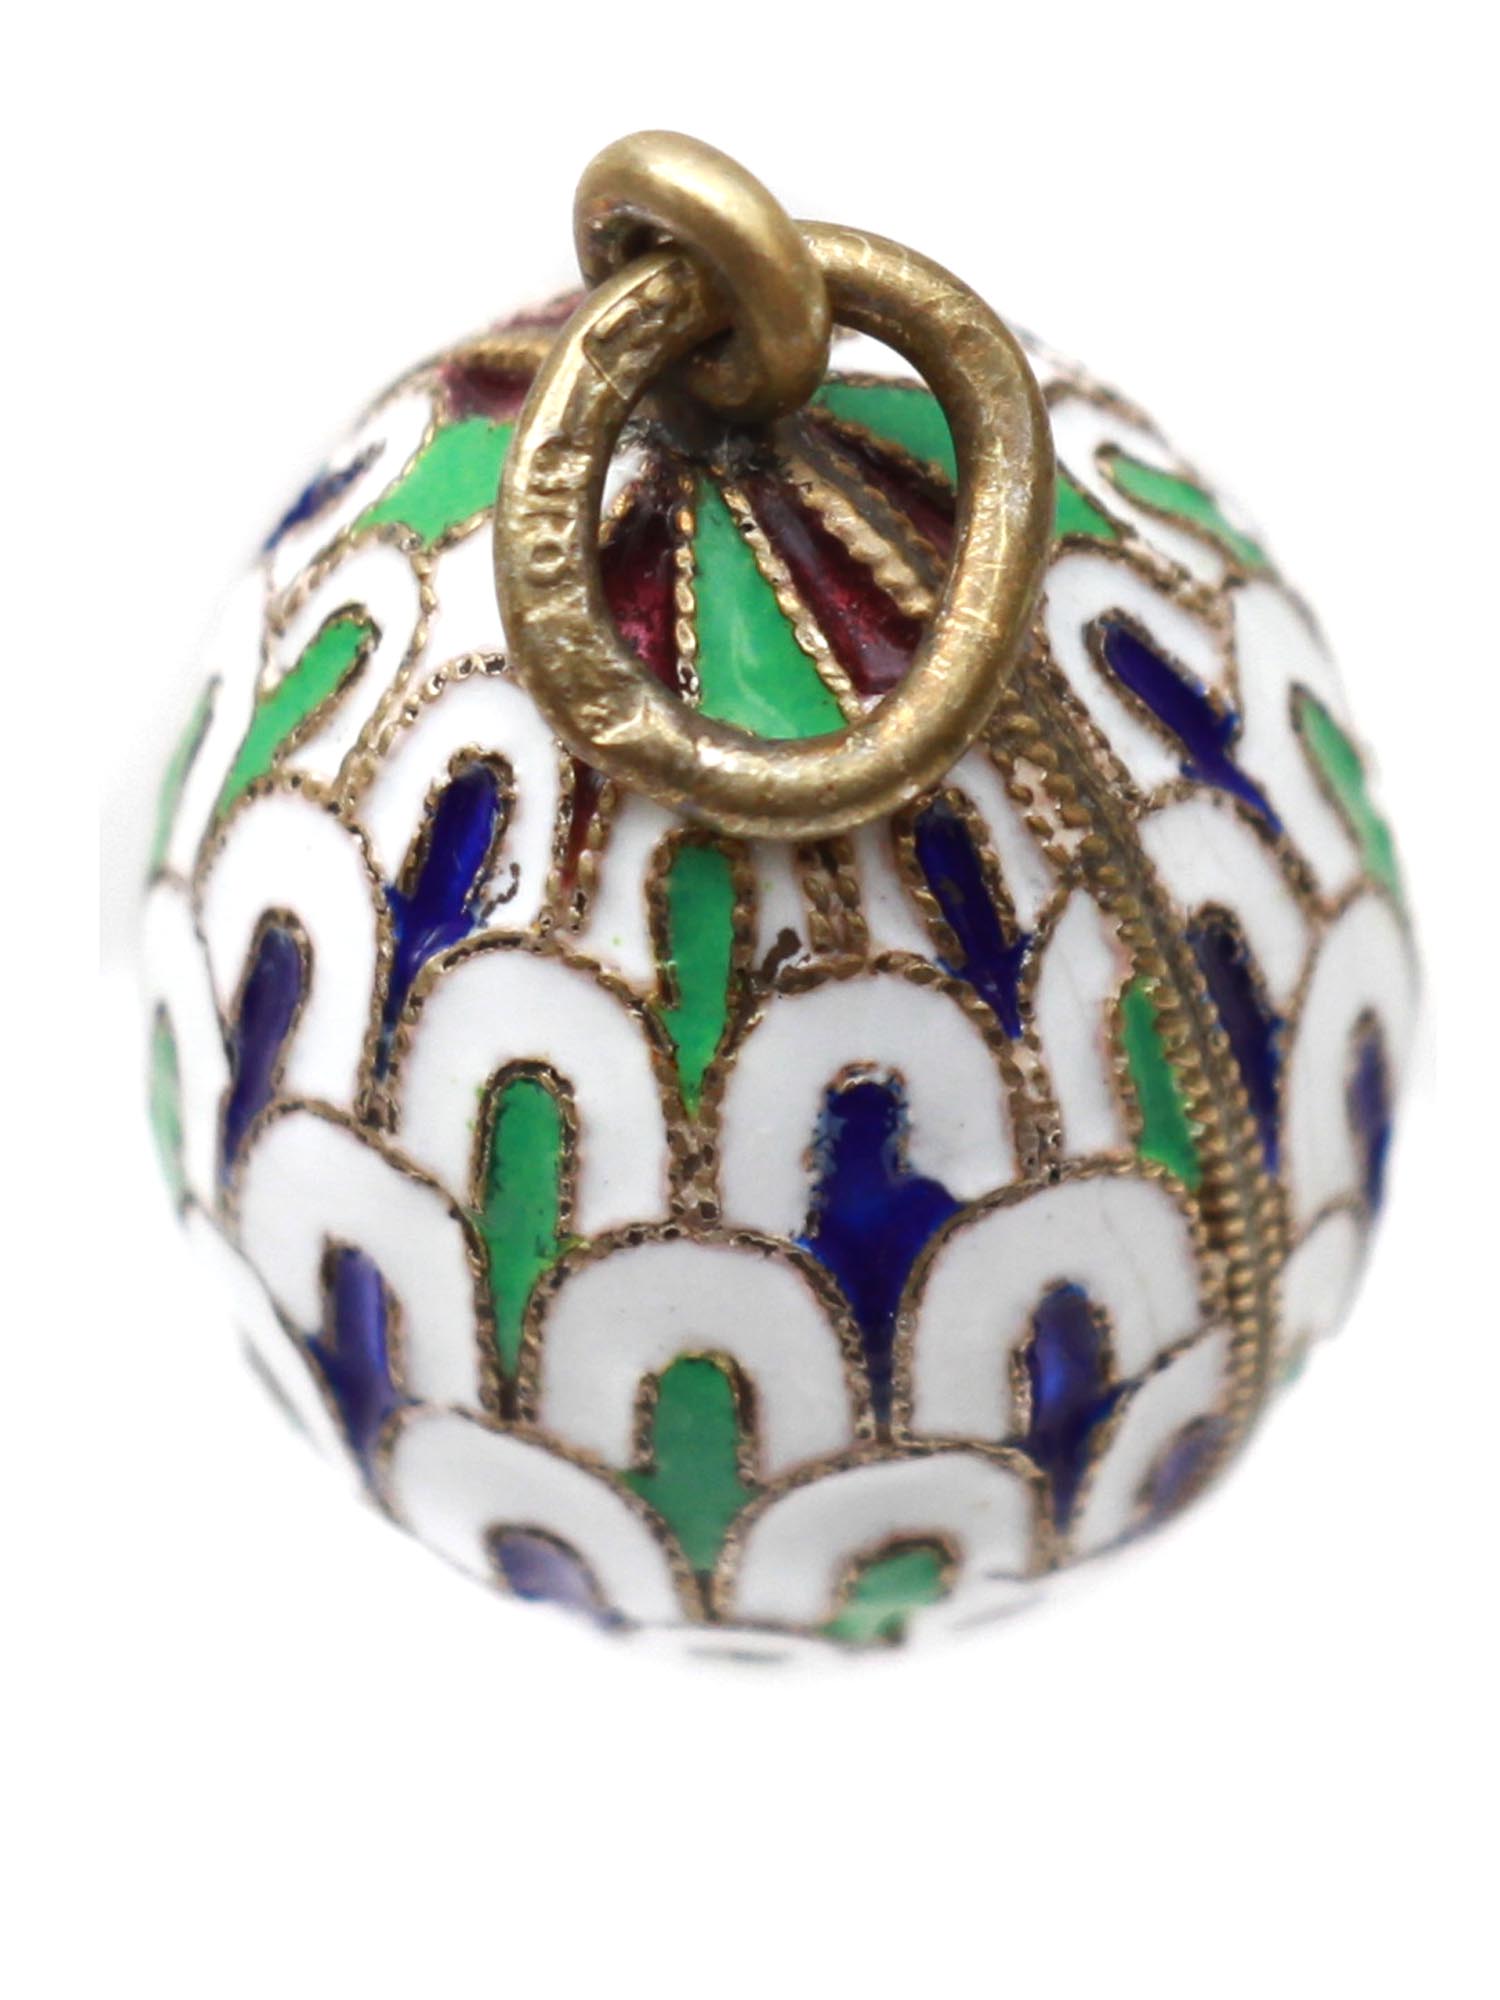 A RUSSIAN SILVER AND ENAMEL EASTER EGG PENDANT PIC-2